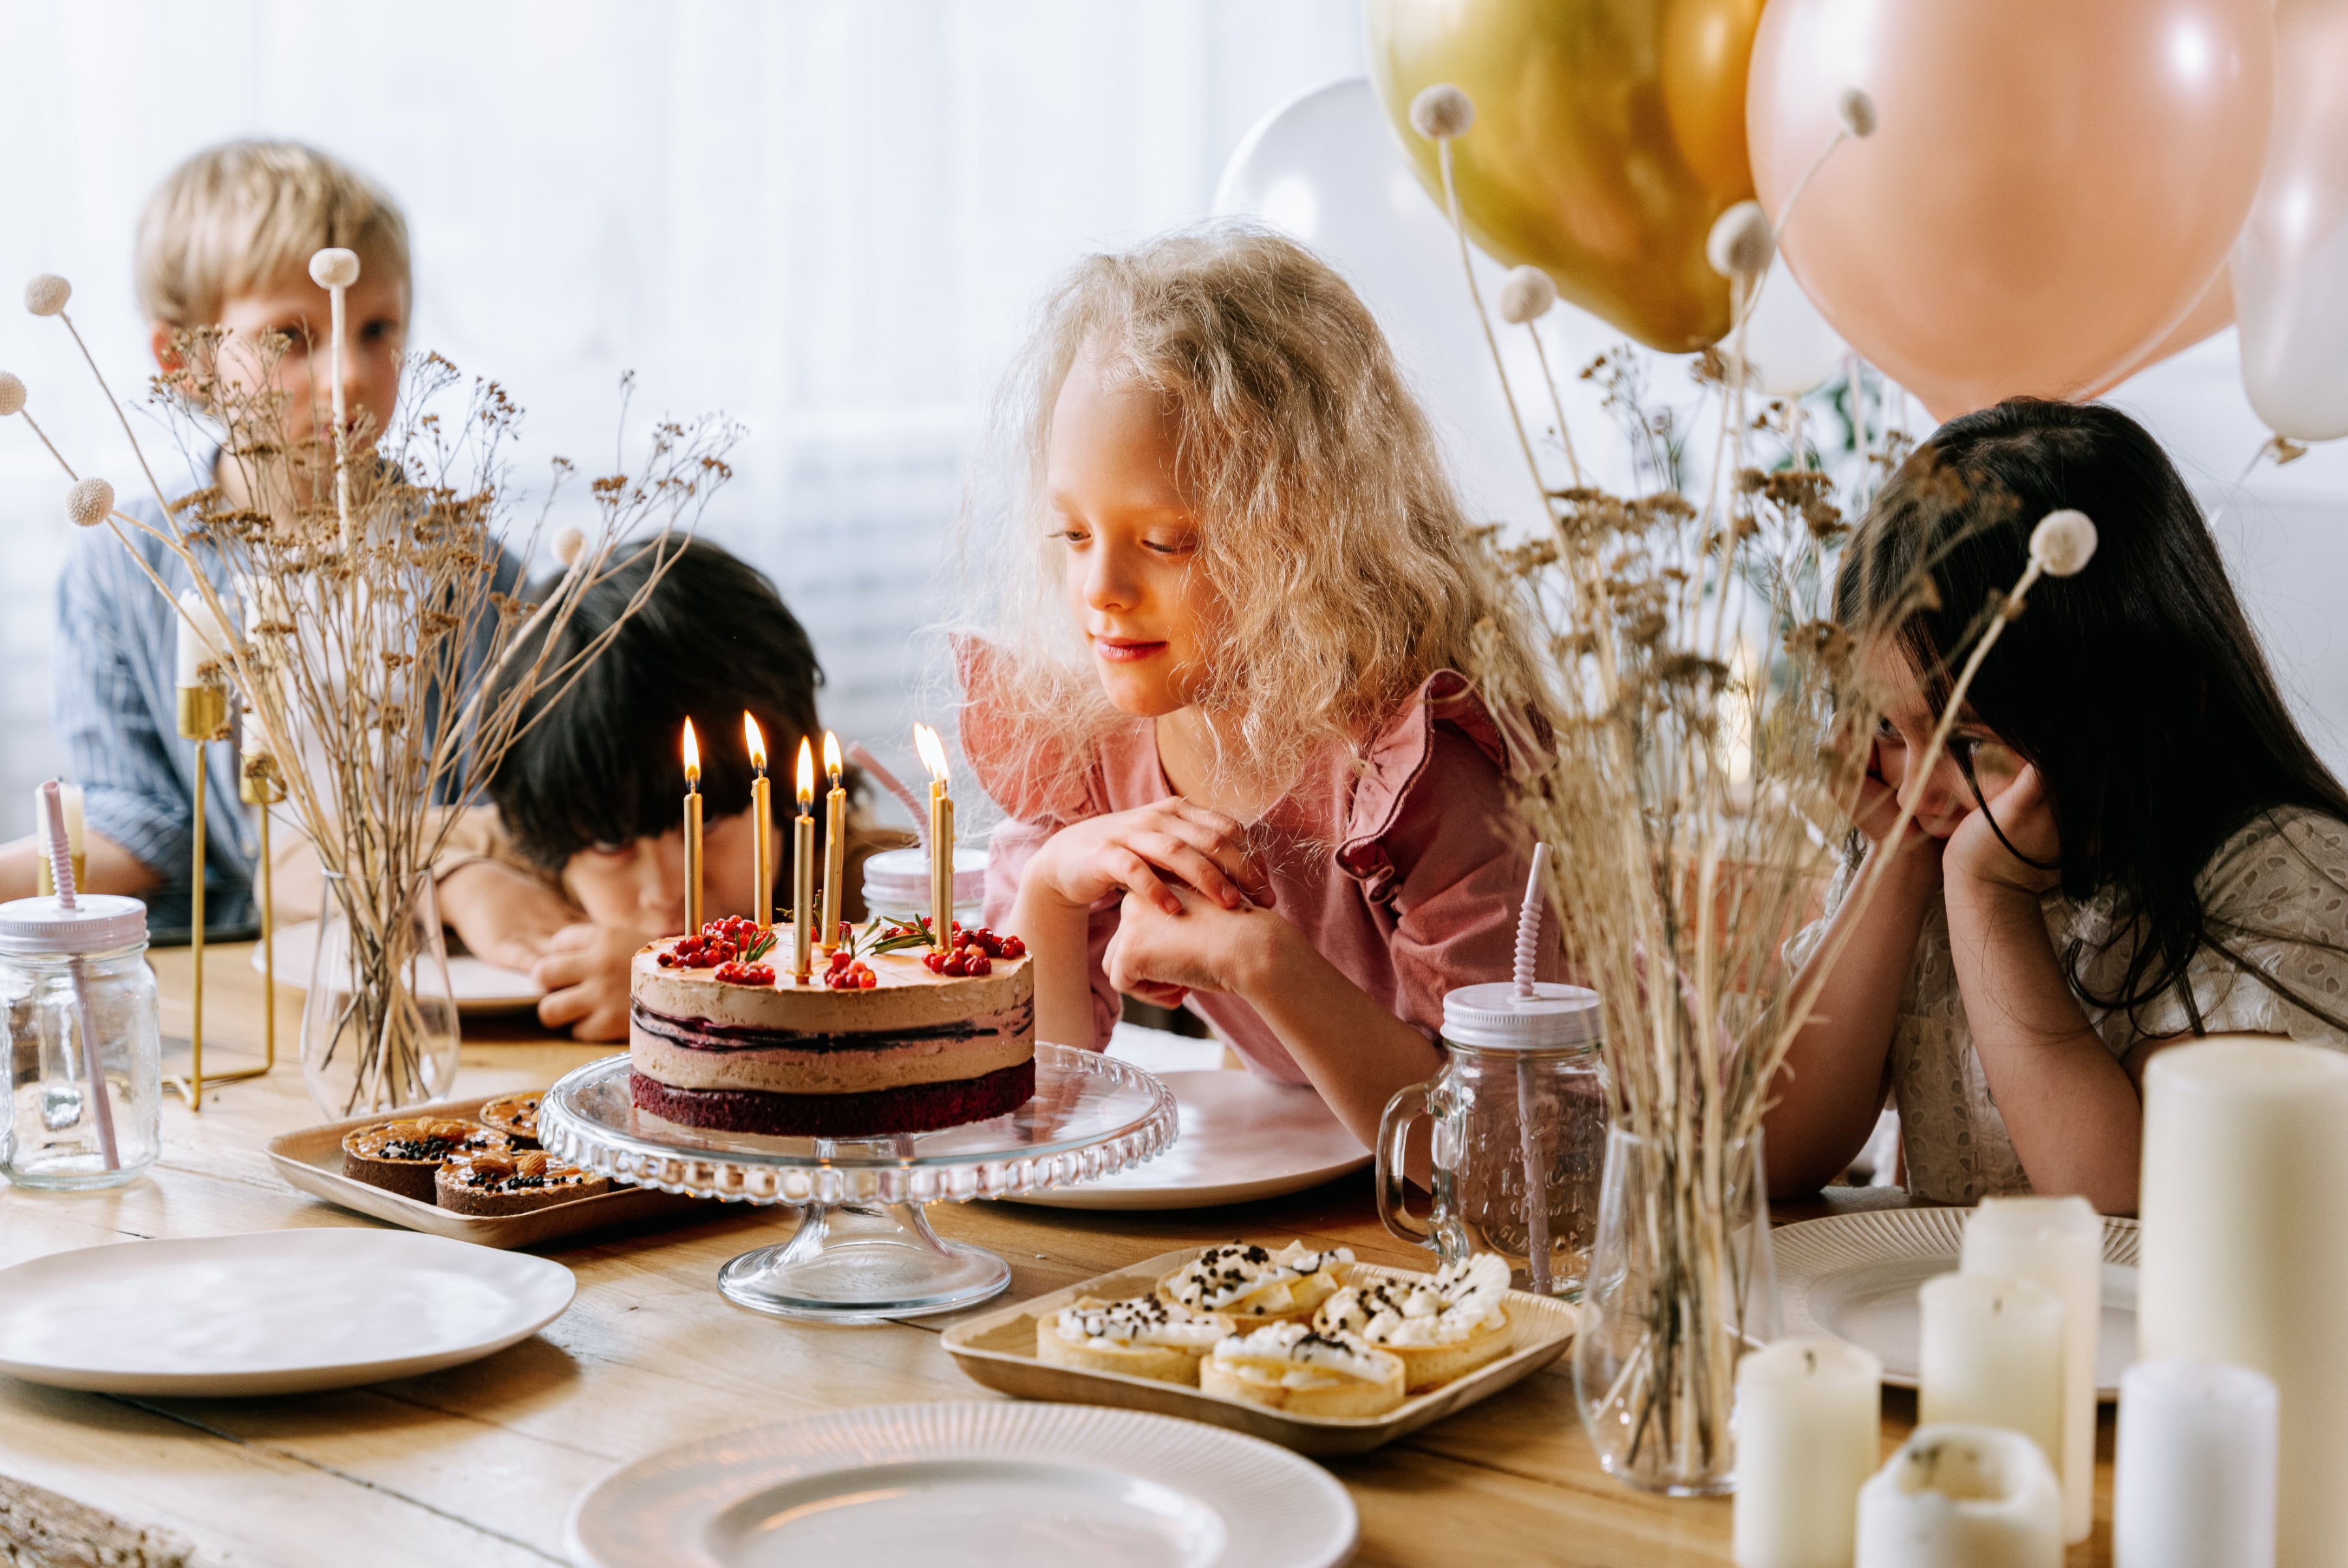 A little girl making a wish on birthday candles at a party.